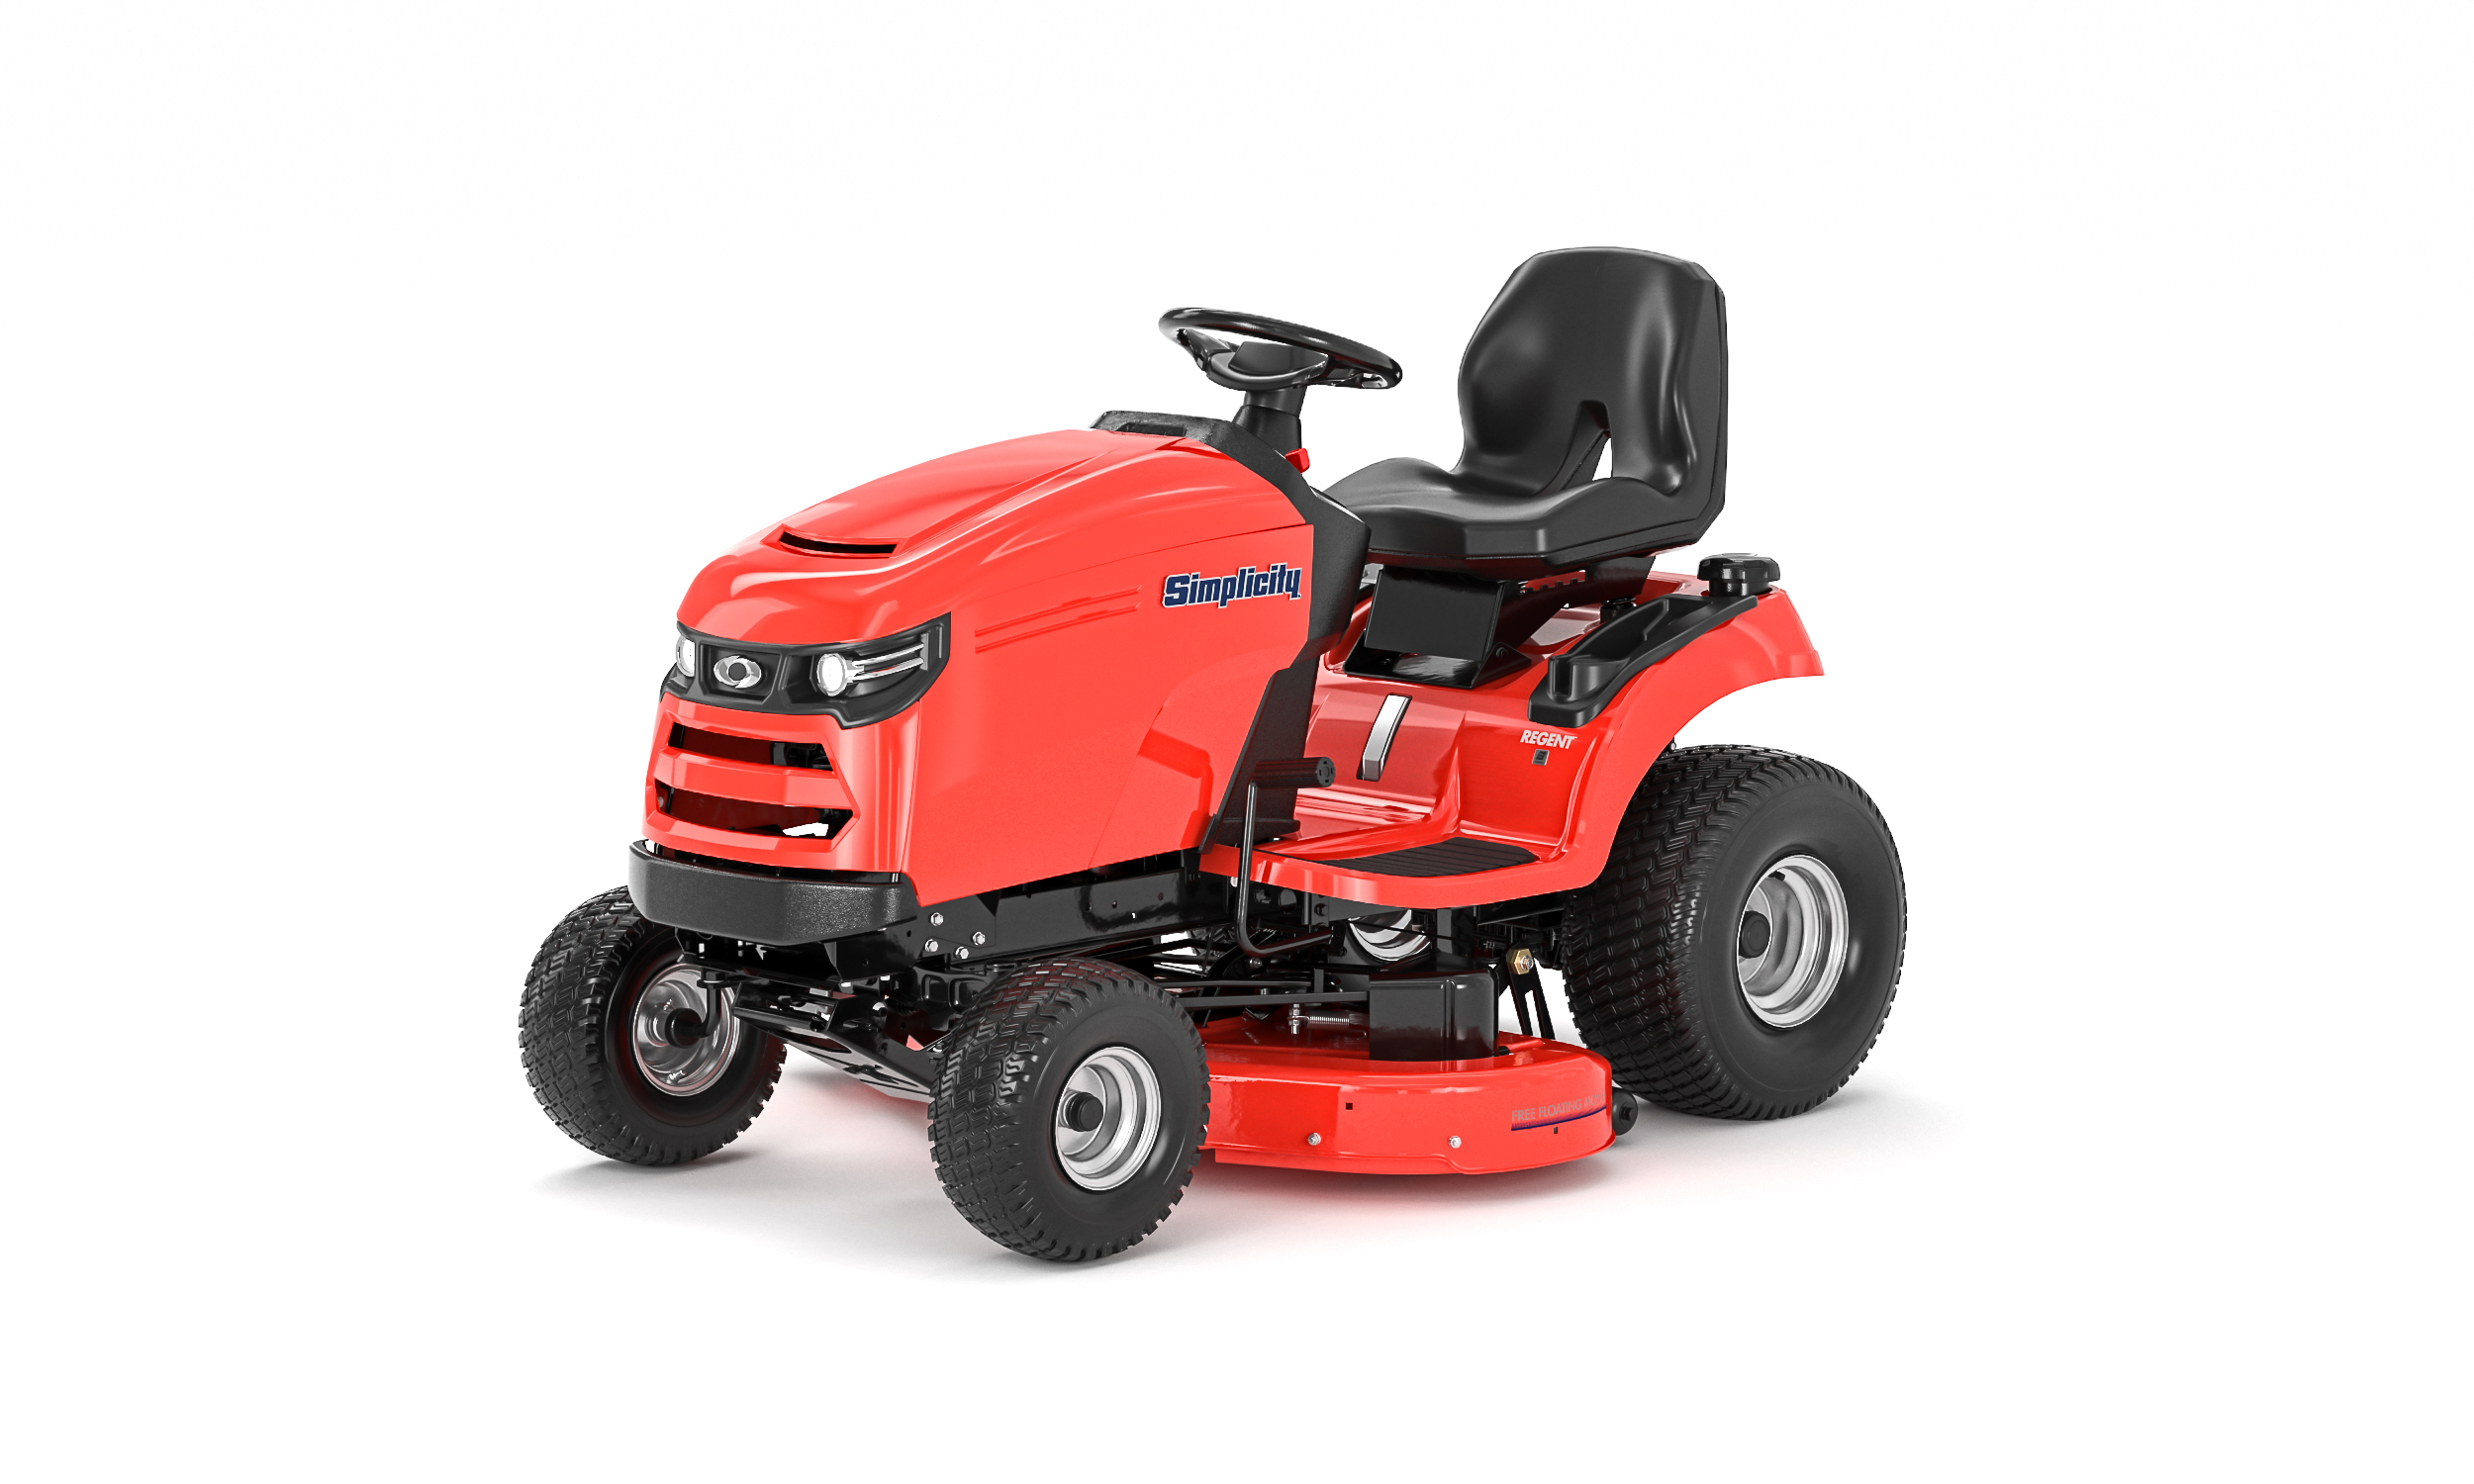 Computer Generated Imagery CGI Rendered Simplicity Briggs and Stratton Lawn Mower